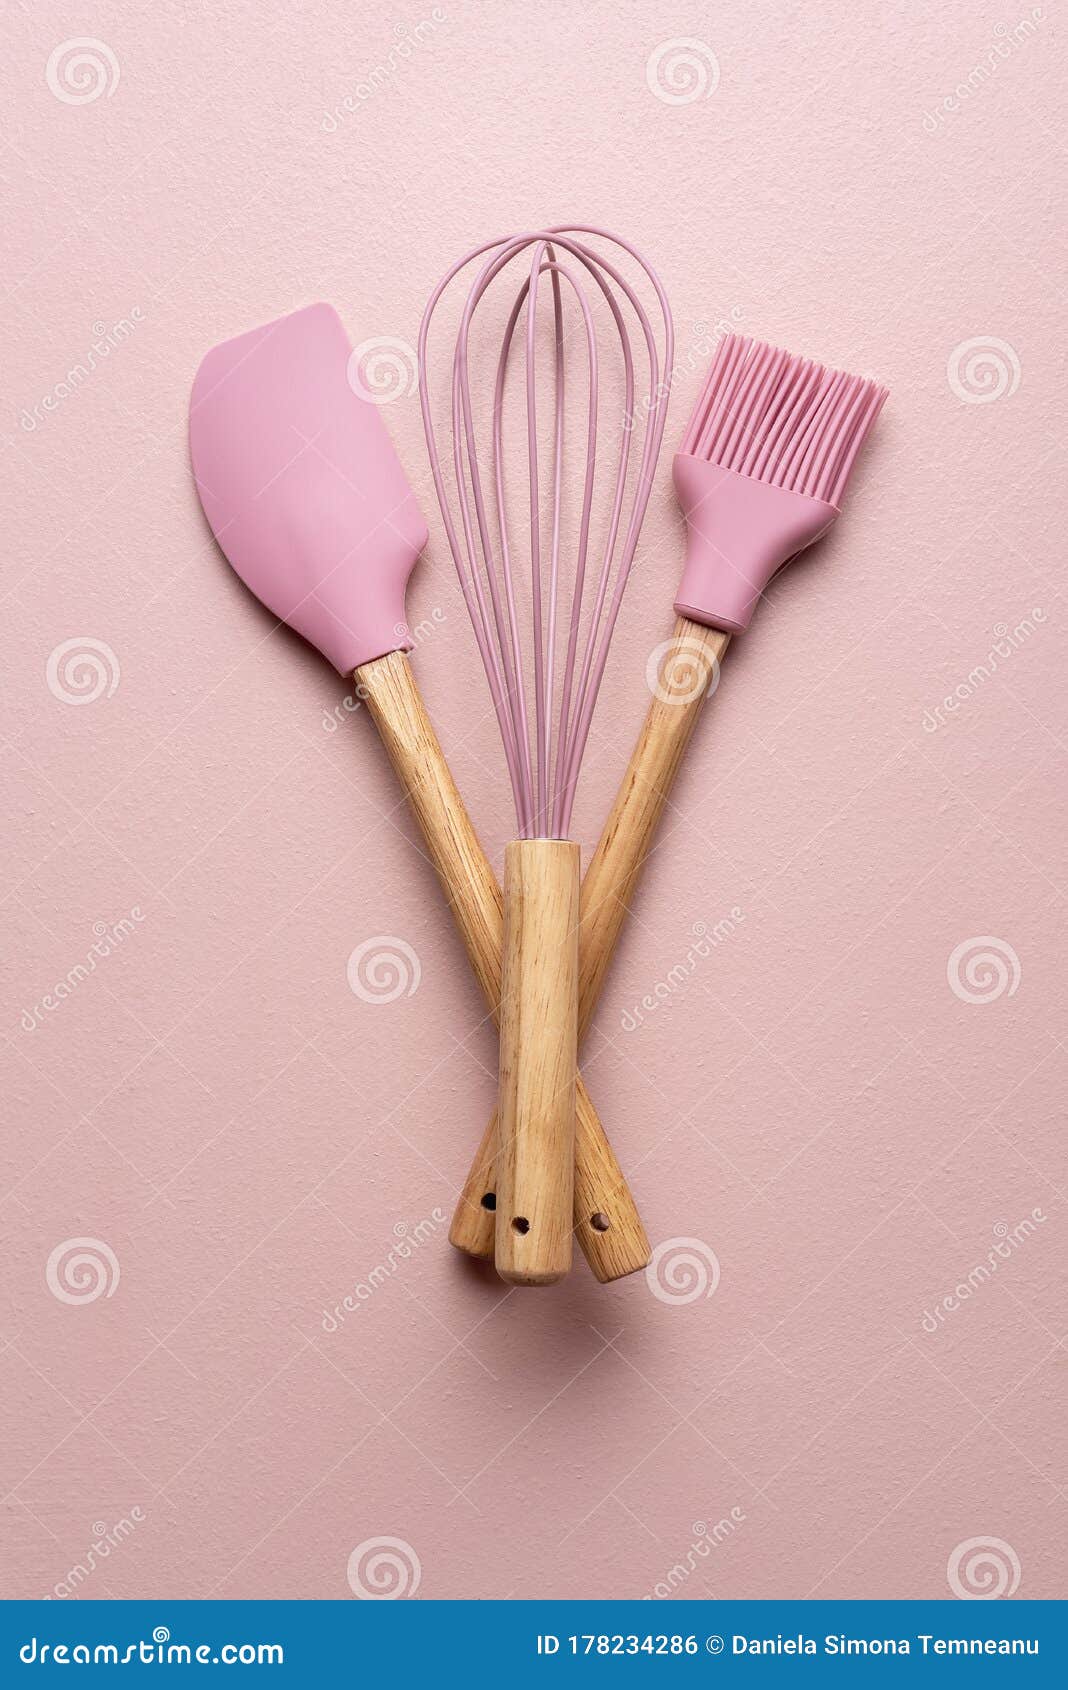 https://thumbs.dreamstime.com/z/baking-tools-pink-table-kitchenware-flat-lay-kitchen-as-brush-whisk-spoon-clean-utensils-178234286.jpg